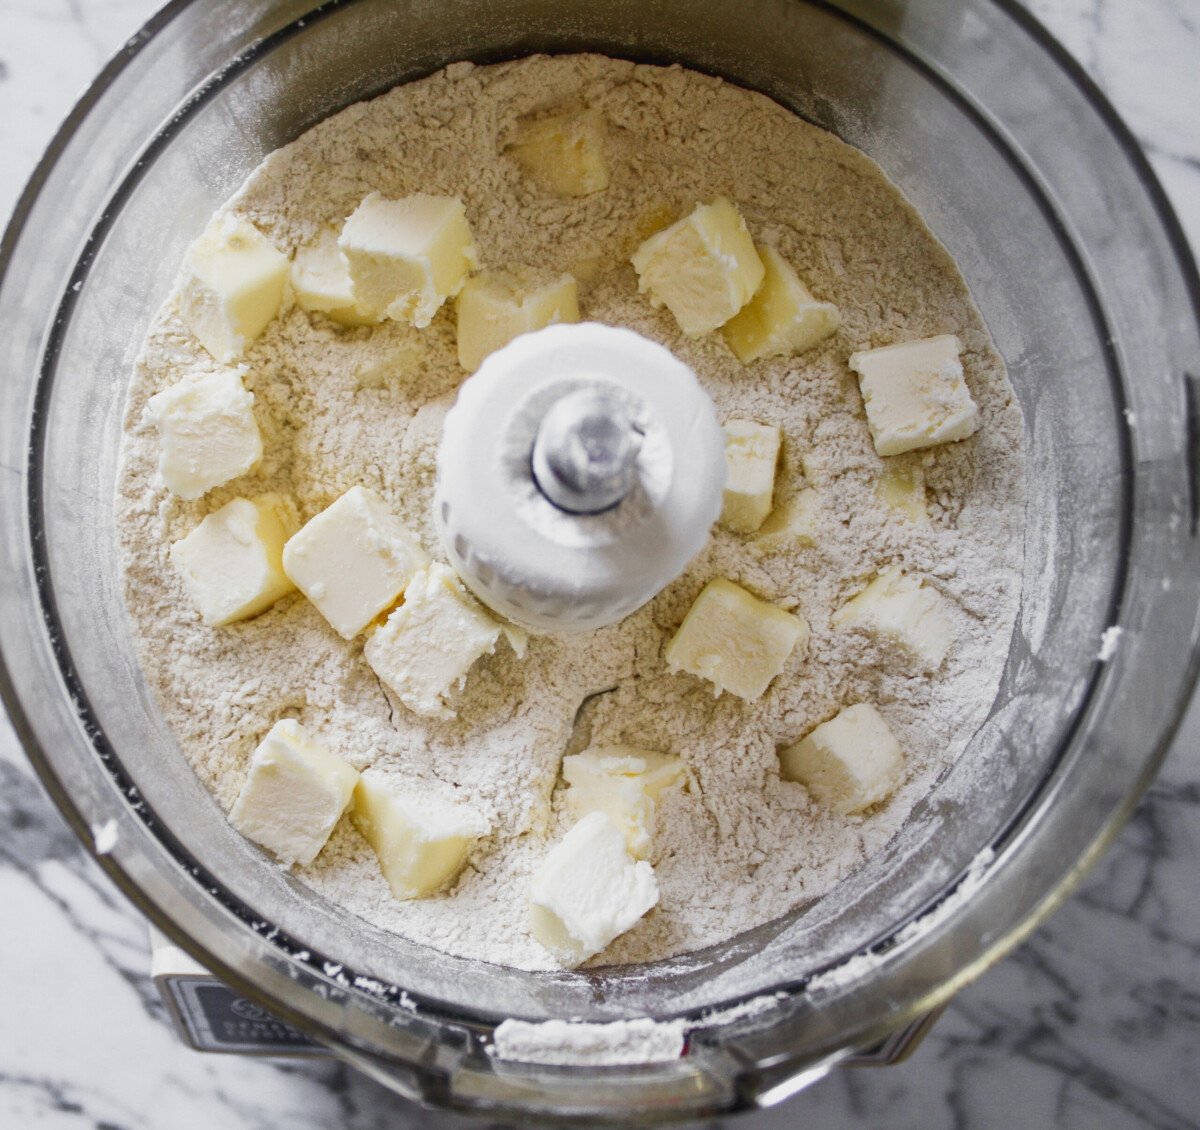 Butter cubes on top of flour in a food processor.